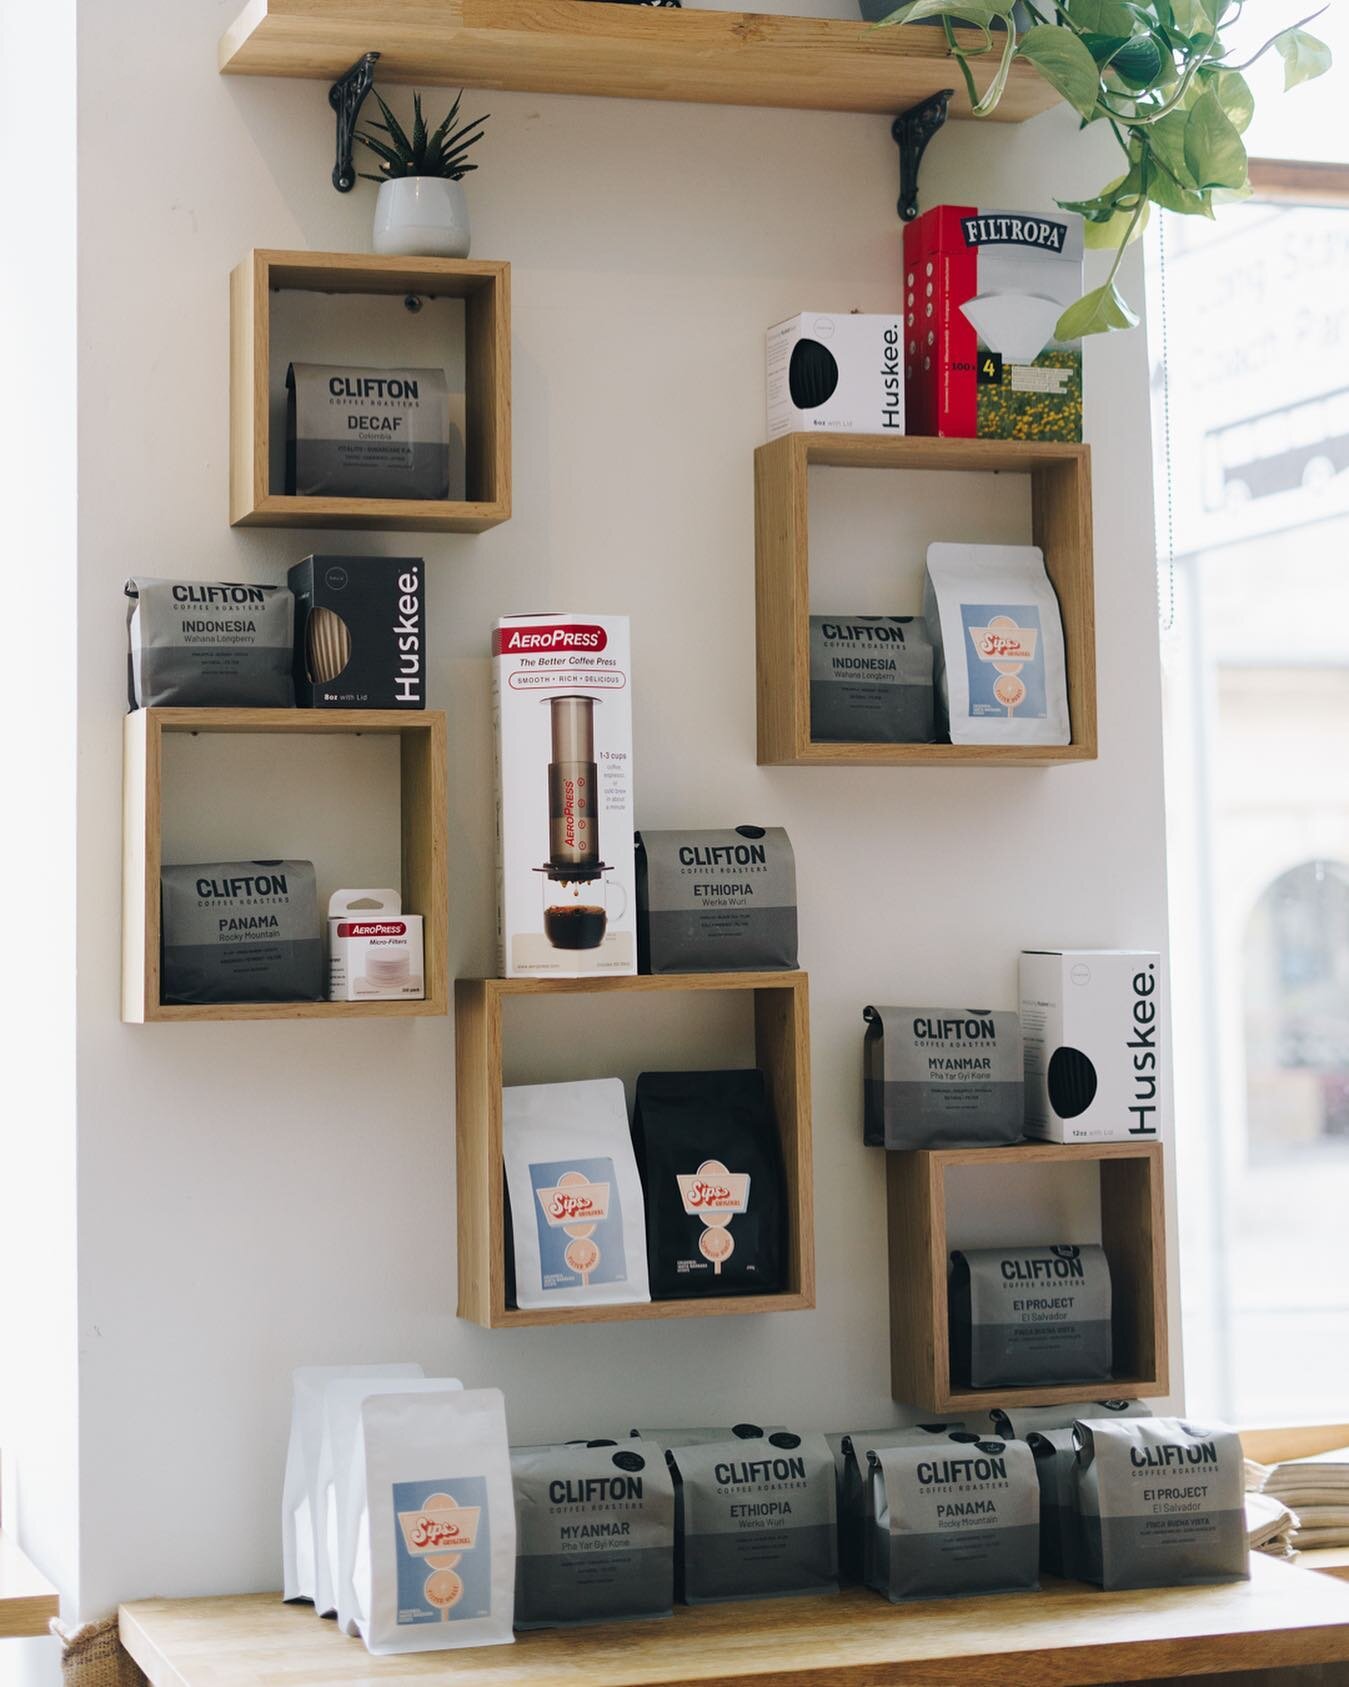 Fully stocked with some yummy coffee! Plenty of options available from @cliftoncoffee ✨🔥
Our personal fave is their incredible Rocky Mountain - Panama 🙌🏻🤌🏻

We also have the delicious Colombian coffee from @sipsandslides.bath 👌🏻🙌🏻

Every bag